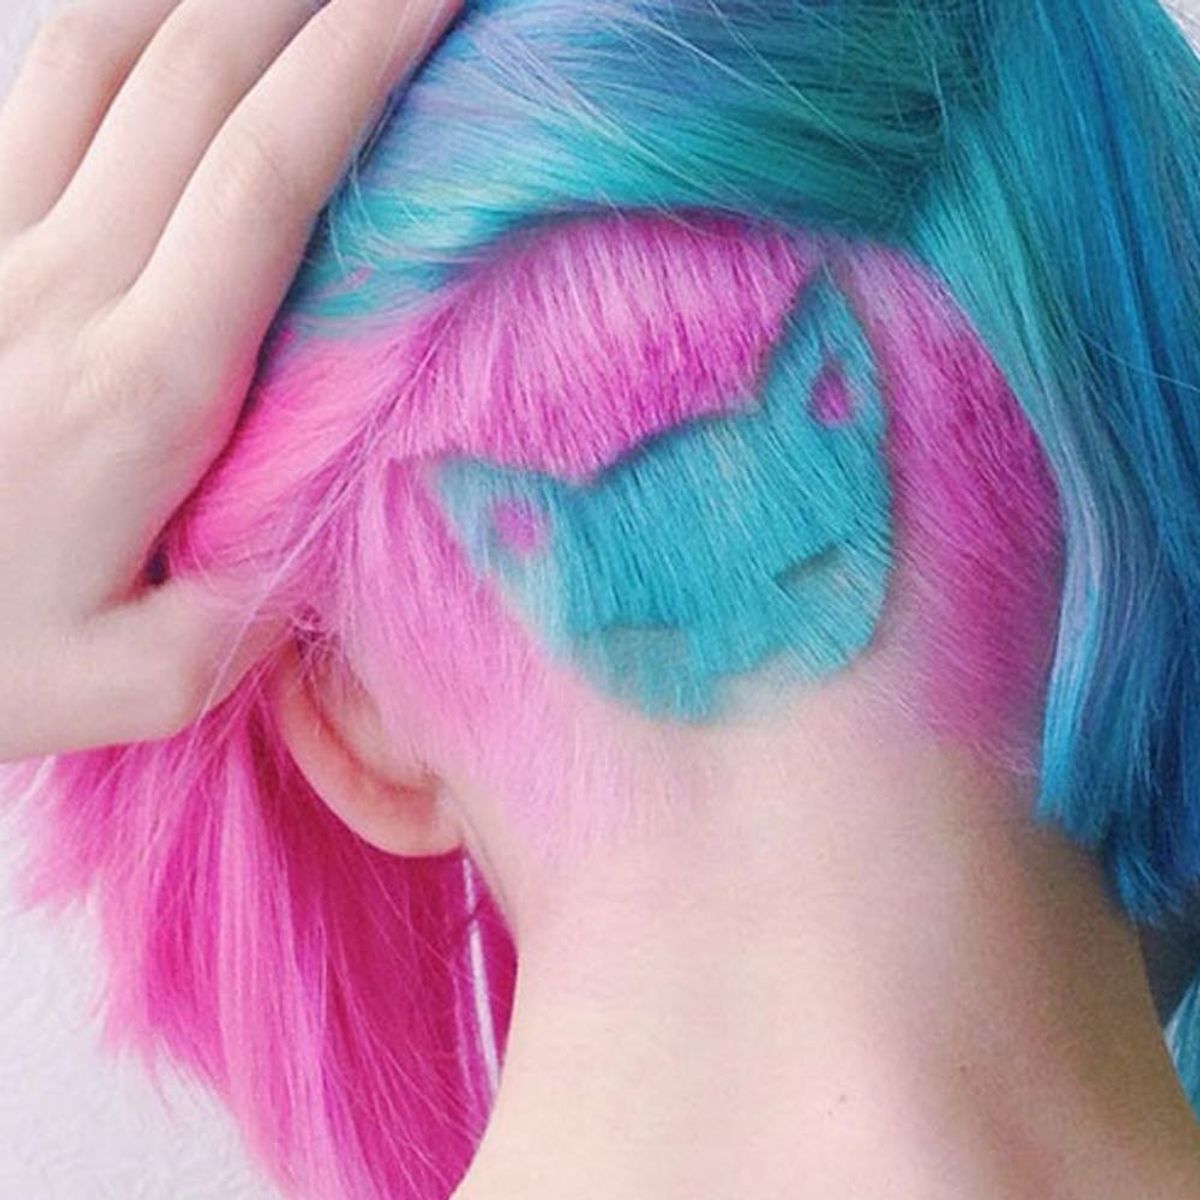 The Rainbow Cat Undercut Is the Most Creative Hair Look You’ll Ever See